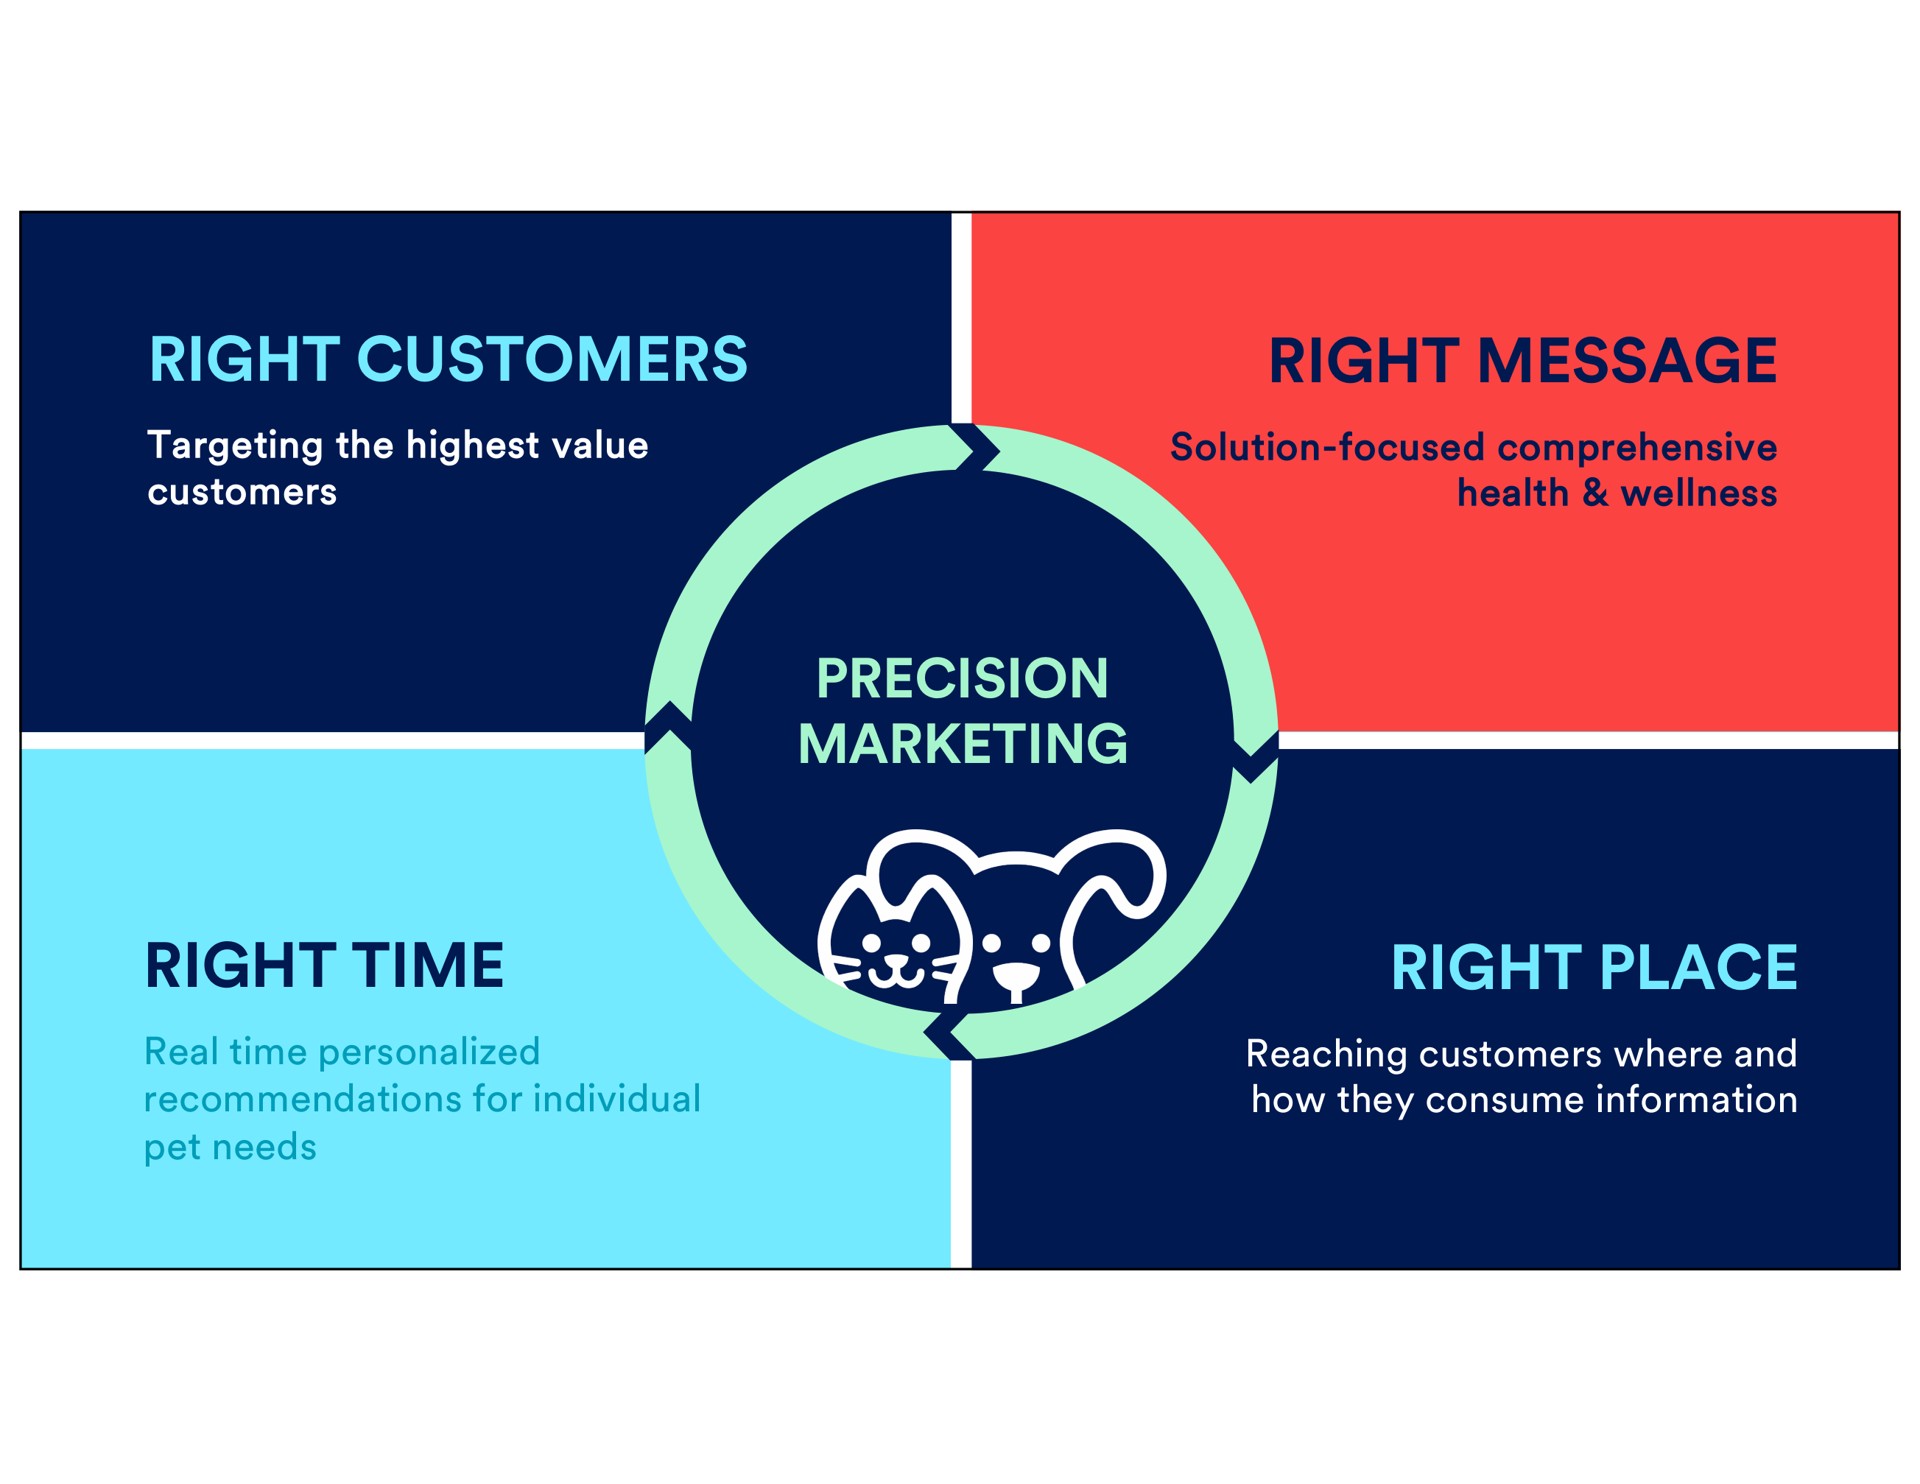 right customers right message right message precision marketing right time right place targeting the highest value real personalized recommendations for individual pet needs how they consume information reaching where and | Petco